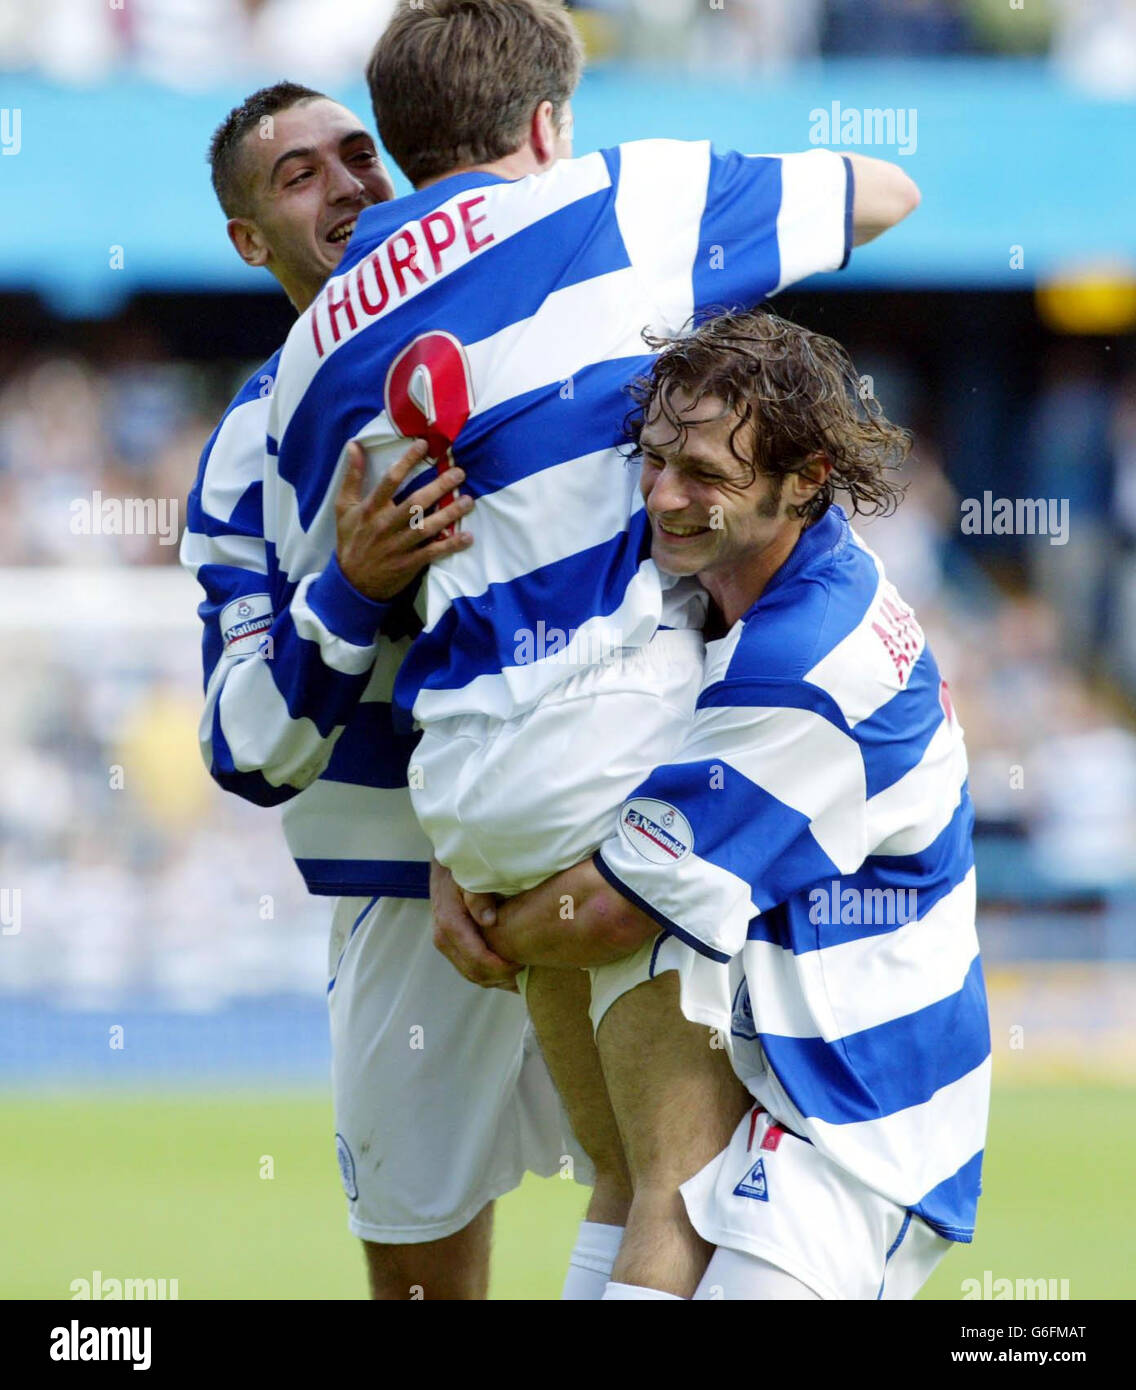 Queens Park Rangers' Tony Thorpe (centre) celebrates with team-mates after scoring against Chesterfield, during their Nationwide Division Two match at QPR's Loftus Road ground in London. QPR won 3-0. NO UNOFFICIAL CLUB WEBSITE USE. Stock Photo